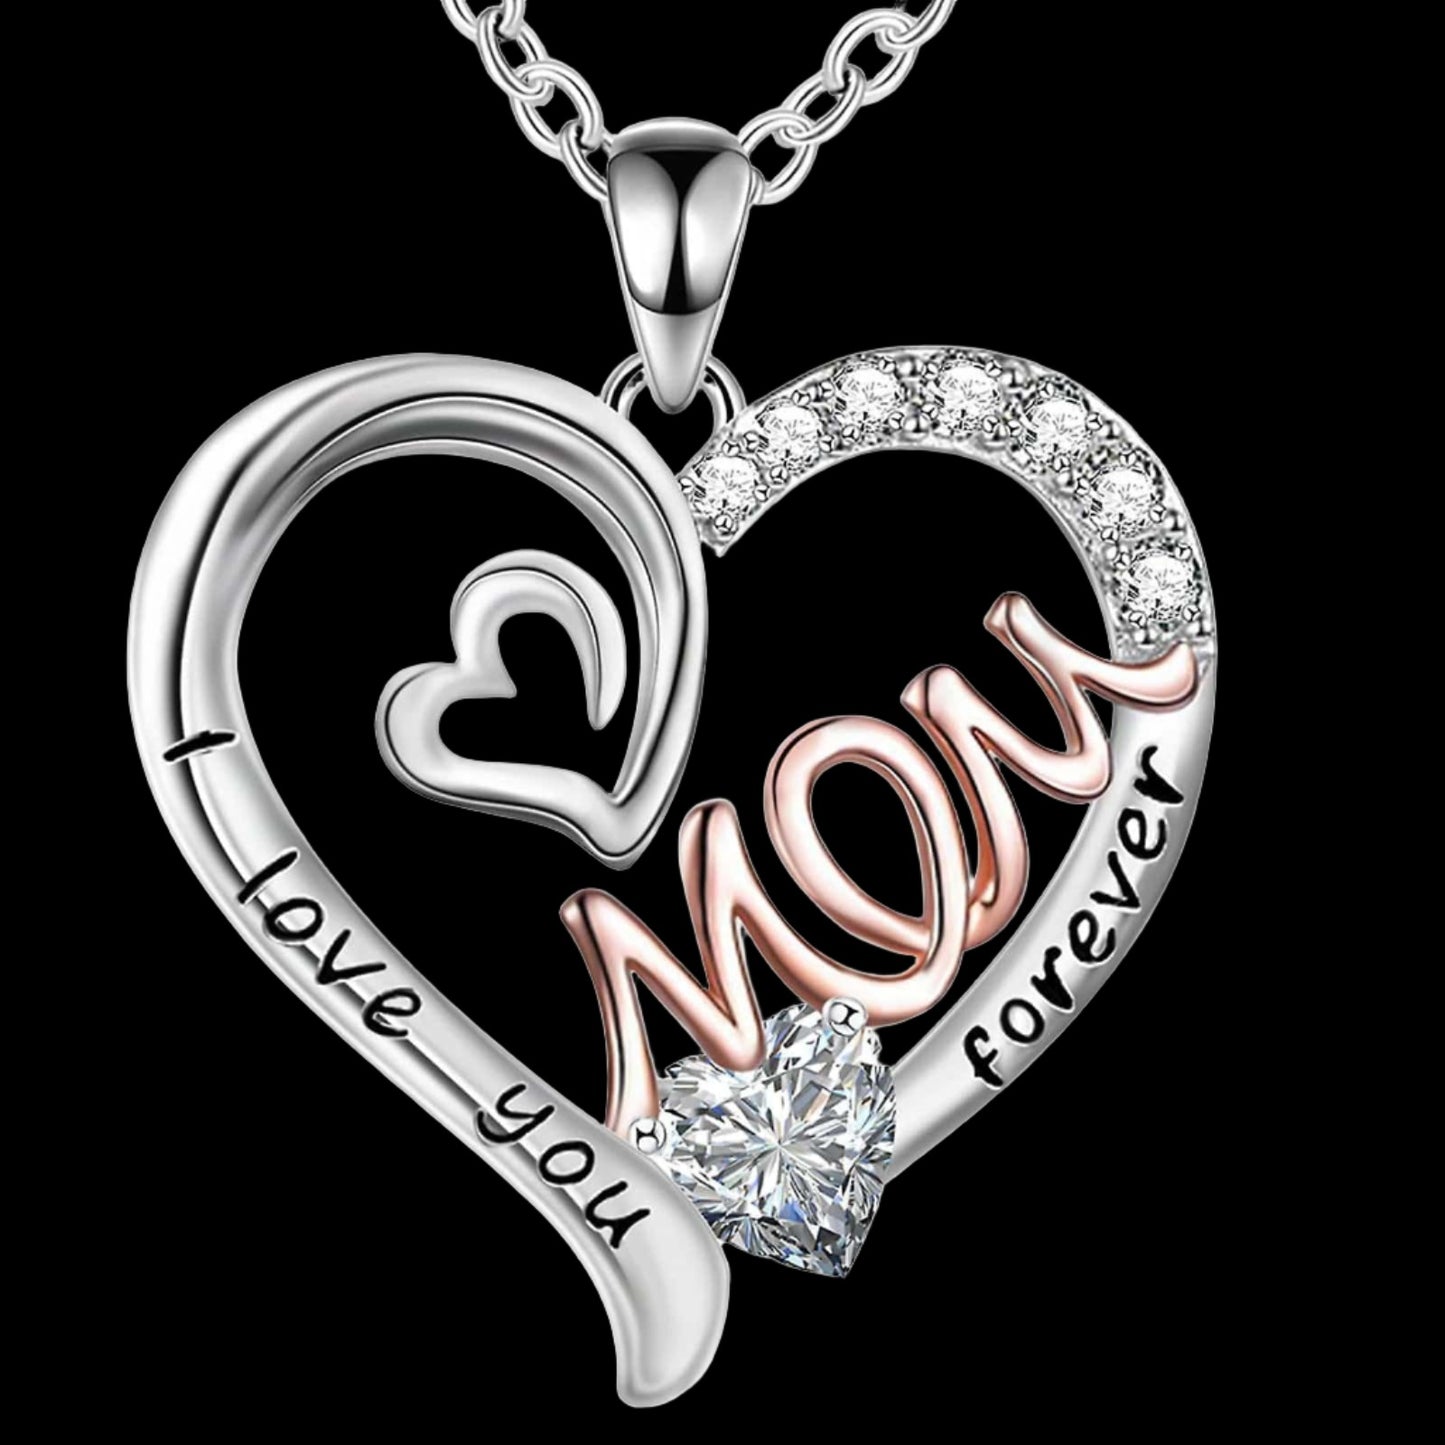 Sparkly Roses Mother's Day Necklace